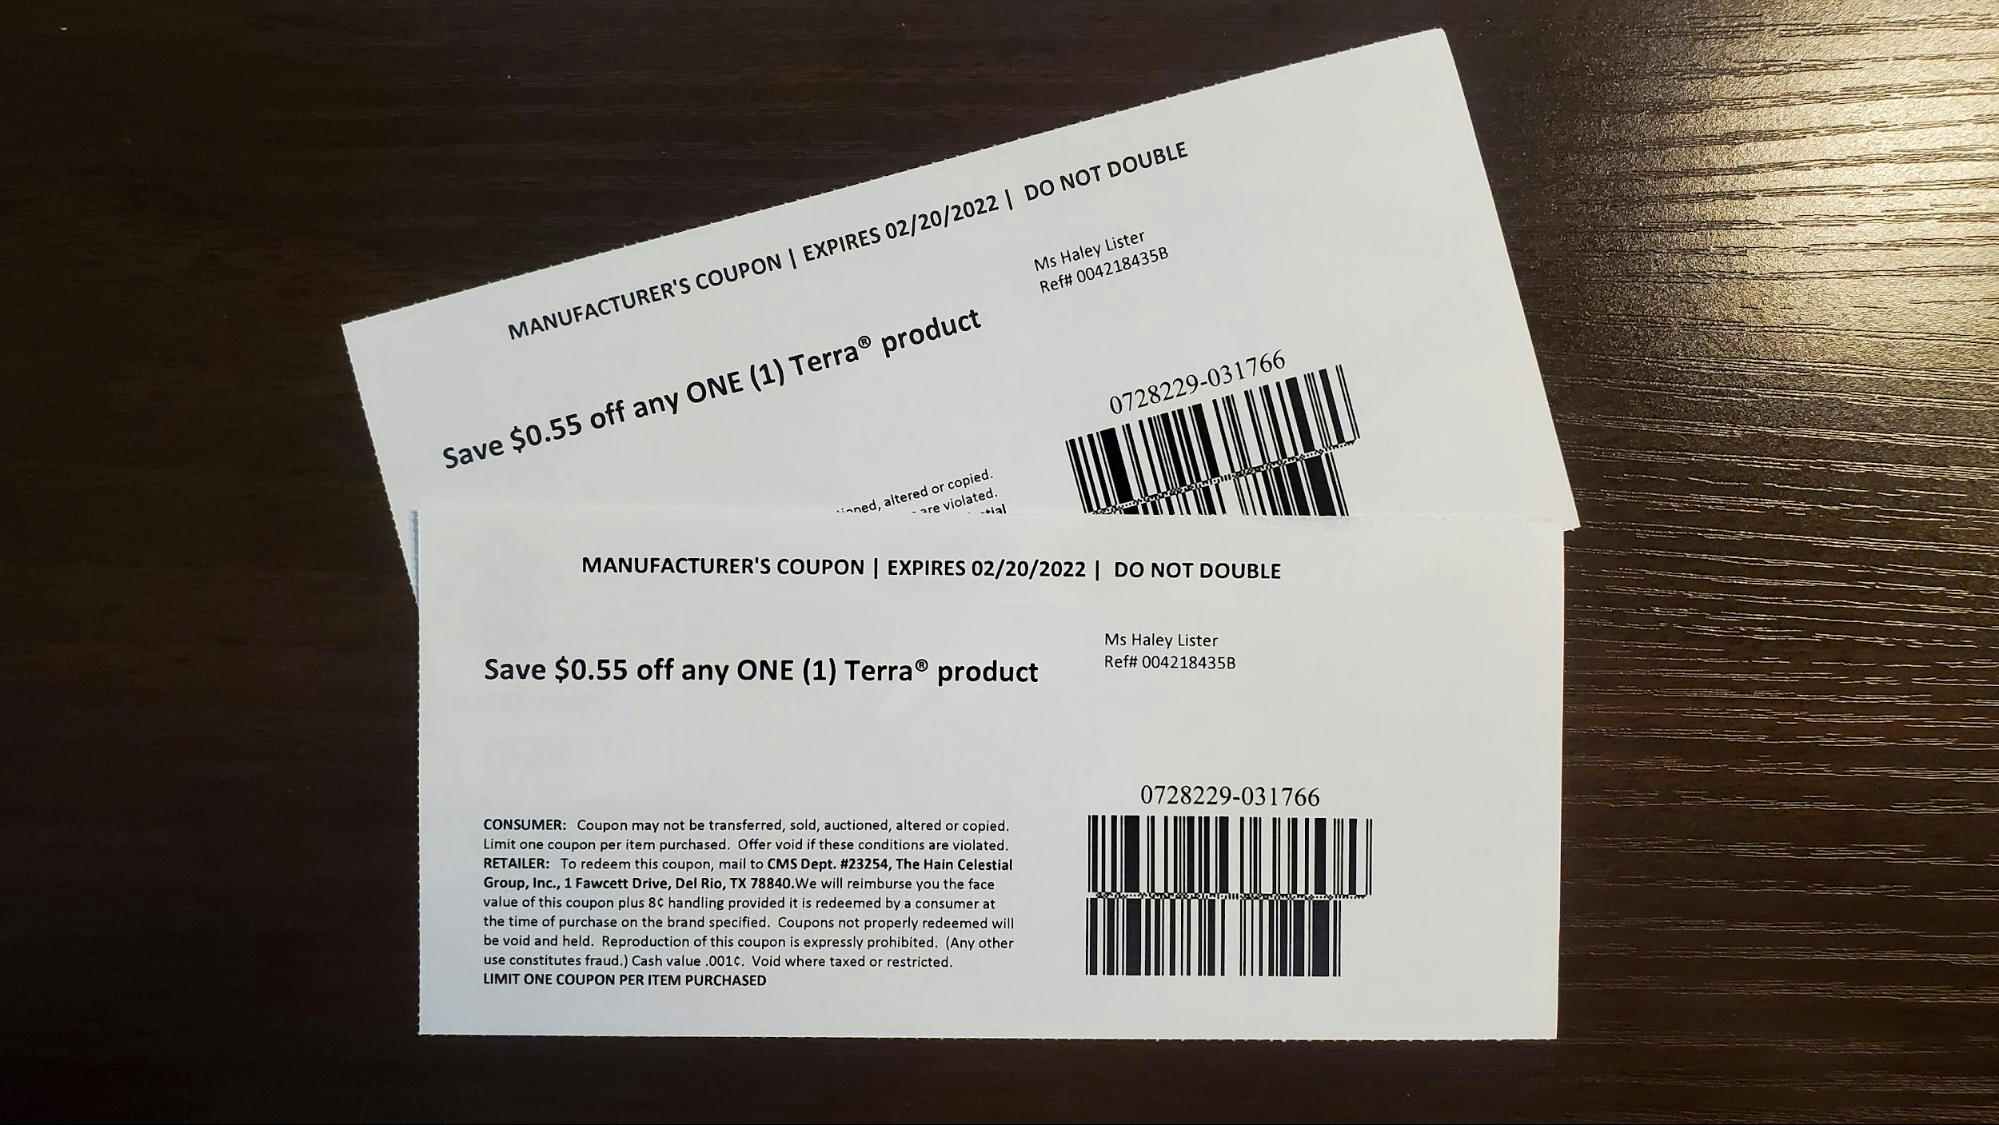 49 Companies That'll Send You Free Coupons by Mail - The Krazy Coupon Lady